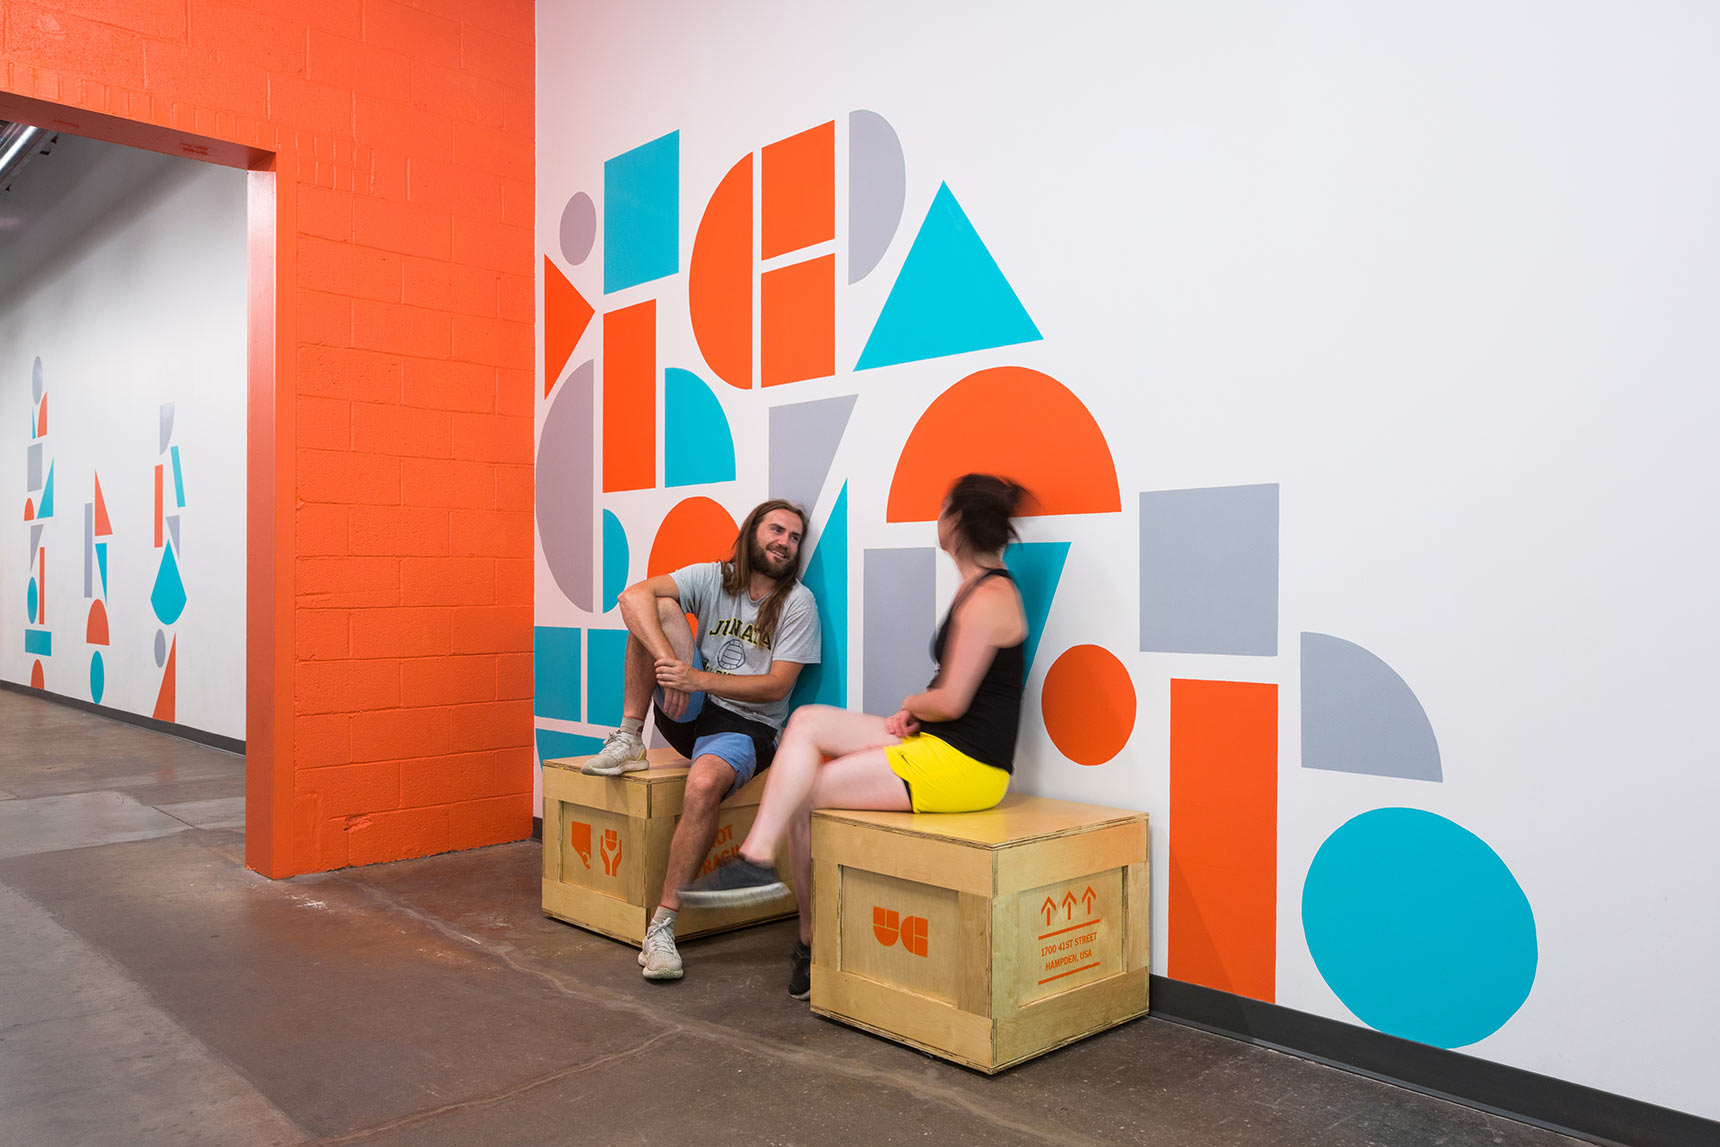 People sitting on custom shipping crate seating in front of colorful geometric shape supergraphic murals in the hallways of the Union Collective building